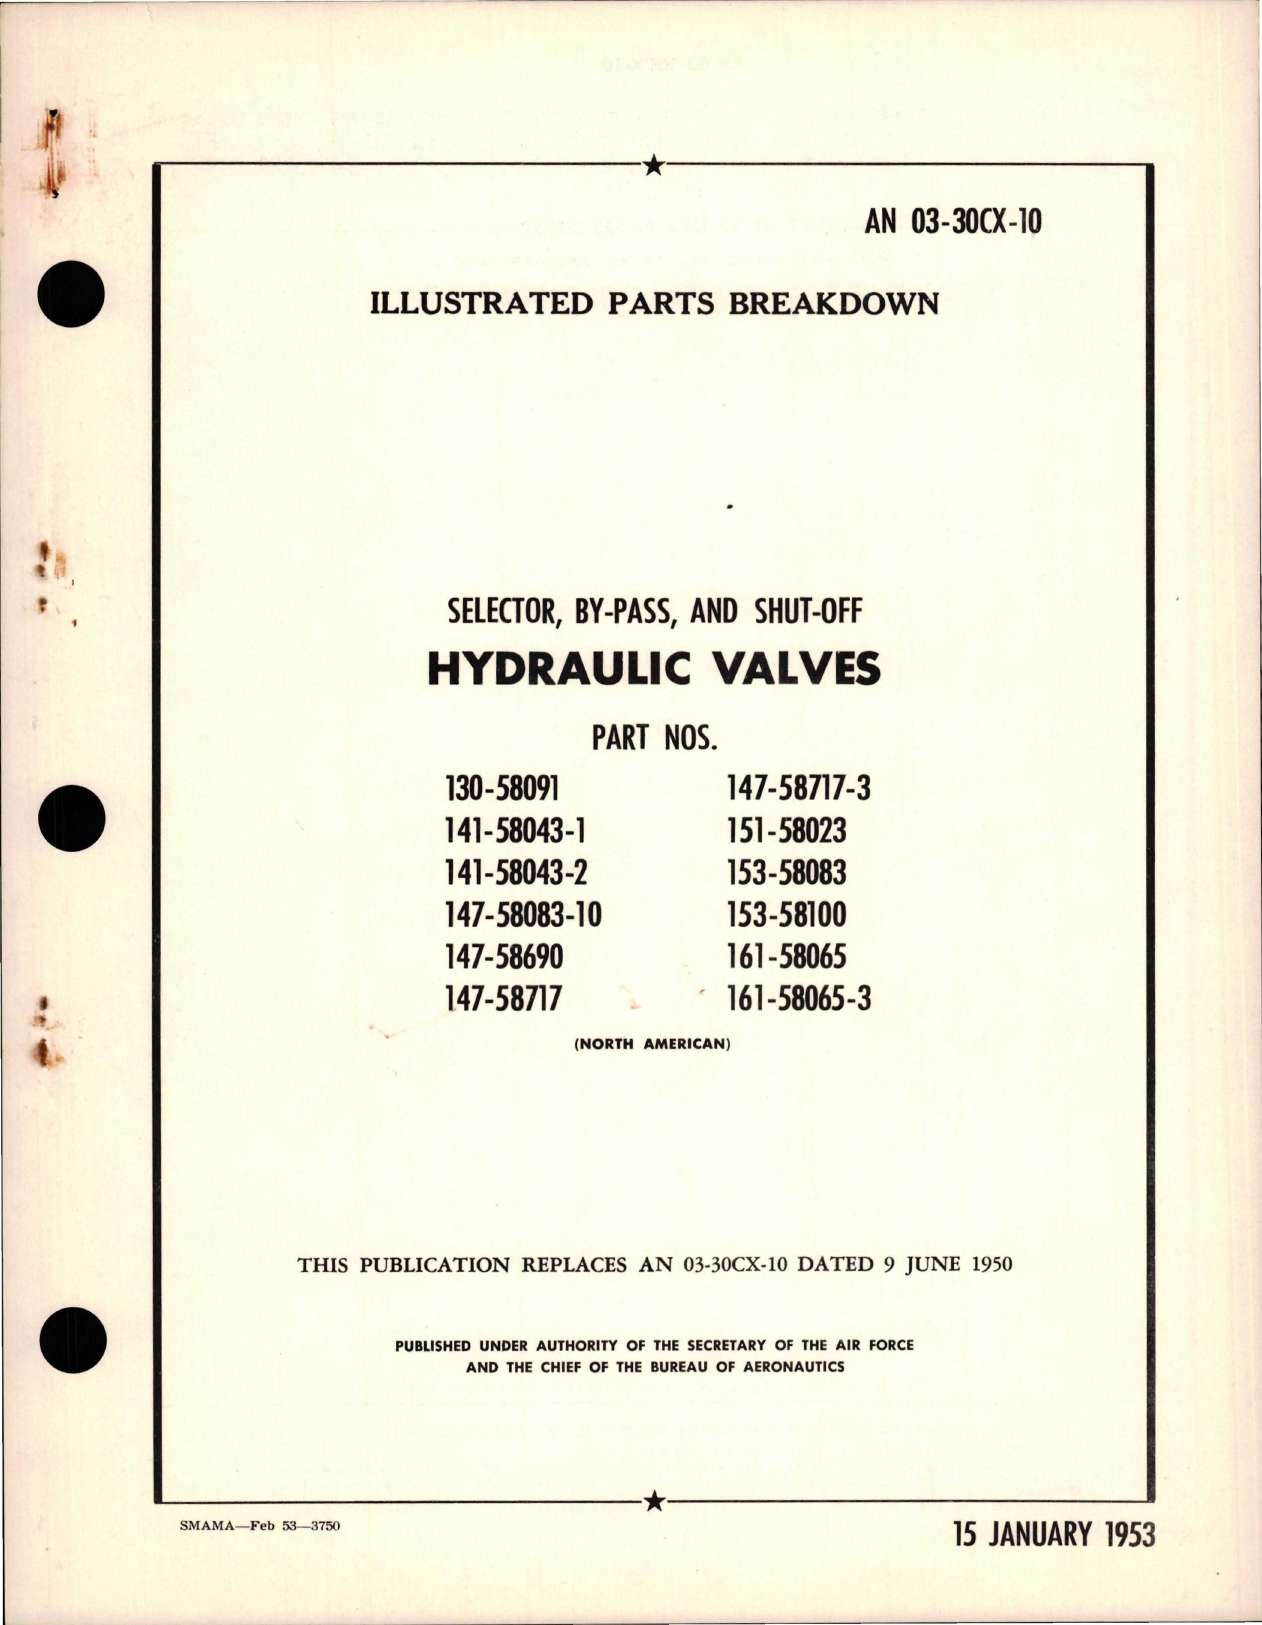 Sample page 1 from AirCorps Library document: Illustrated Parts Breakdown for Selector, By-Pass, and Shut Off Hydraulic Valves 